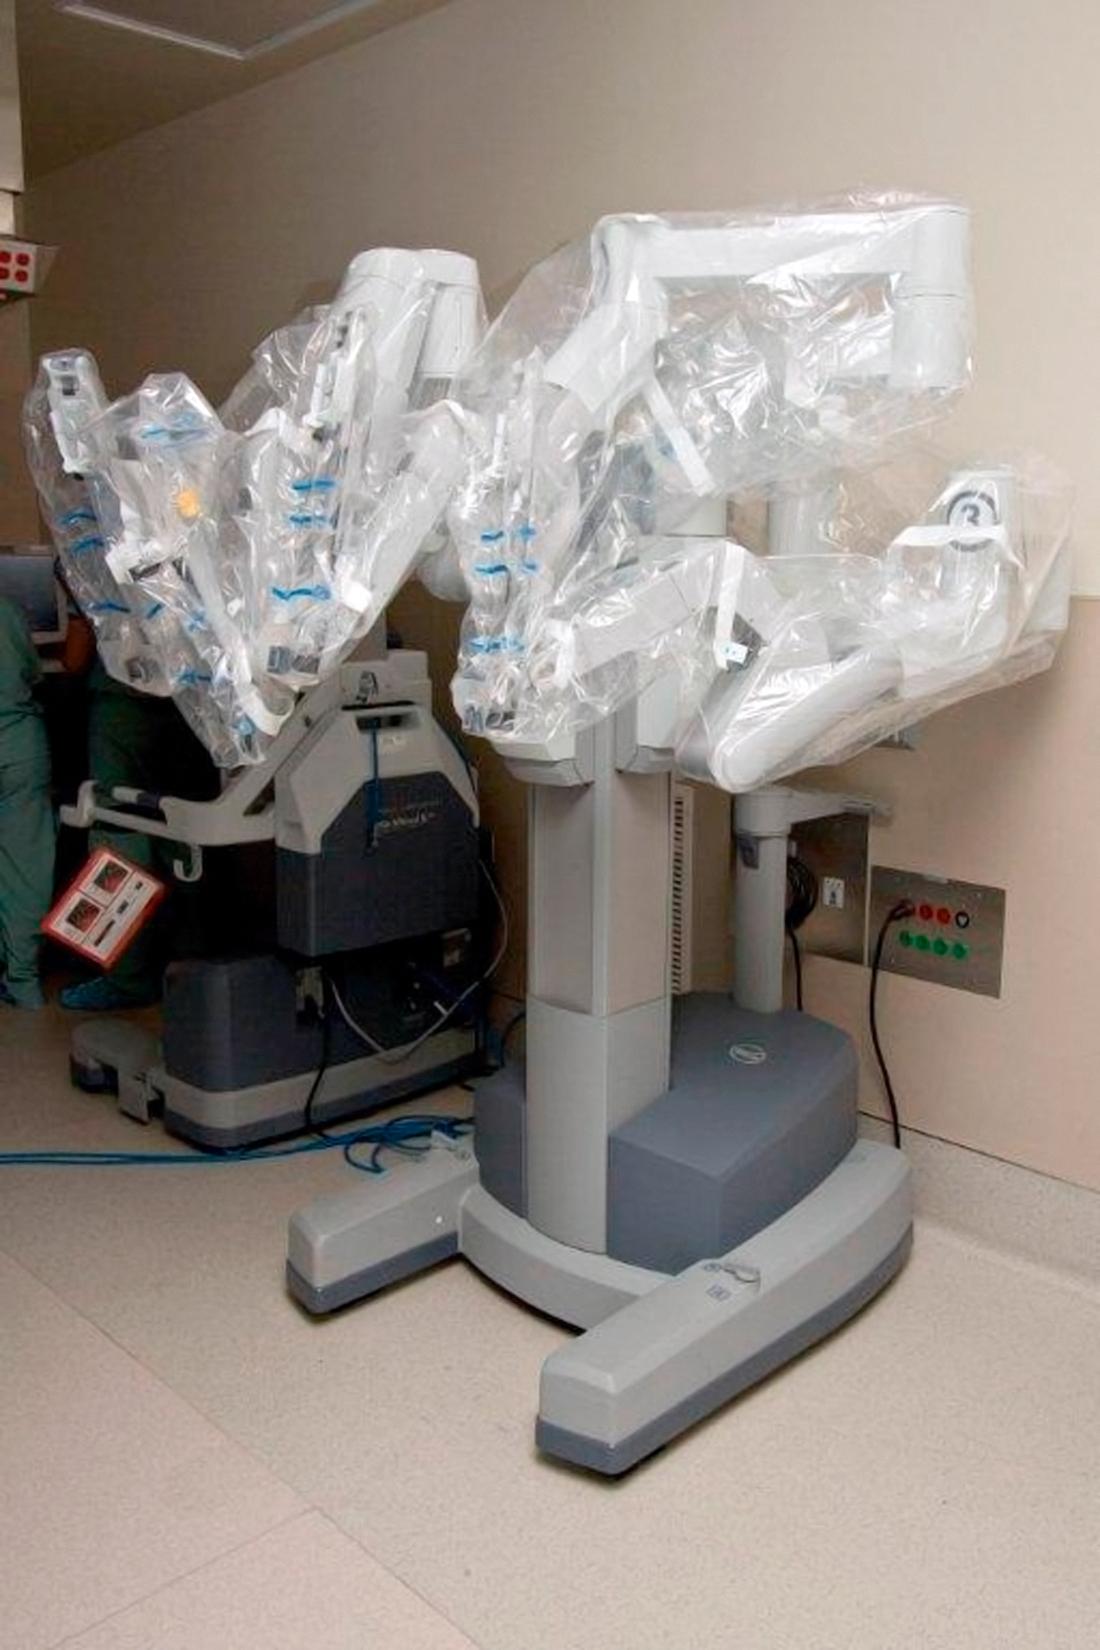 FIG. 118.2, da Vinci Si system with sterile plastic bags ready for surgery.